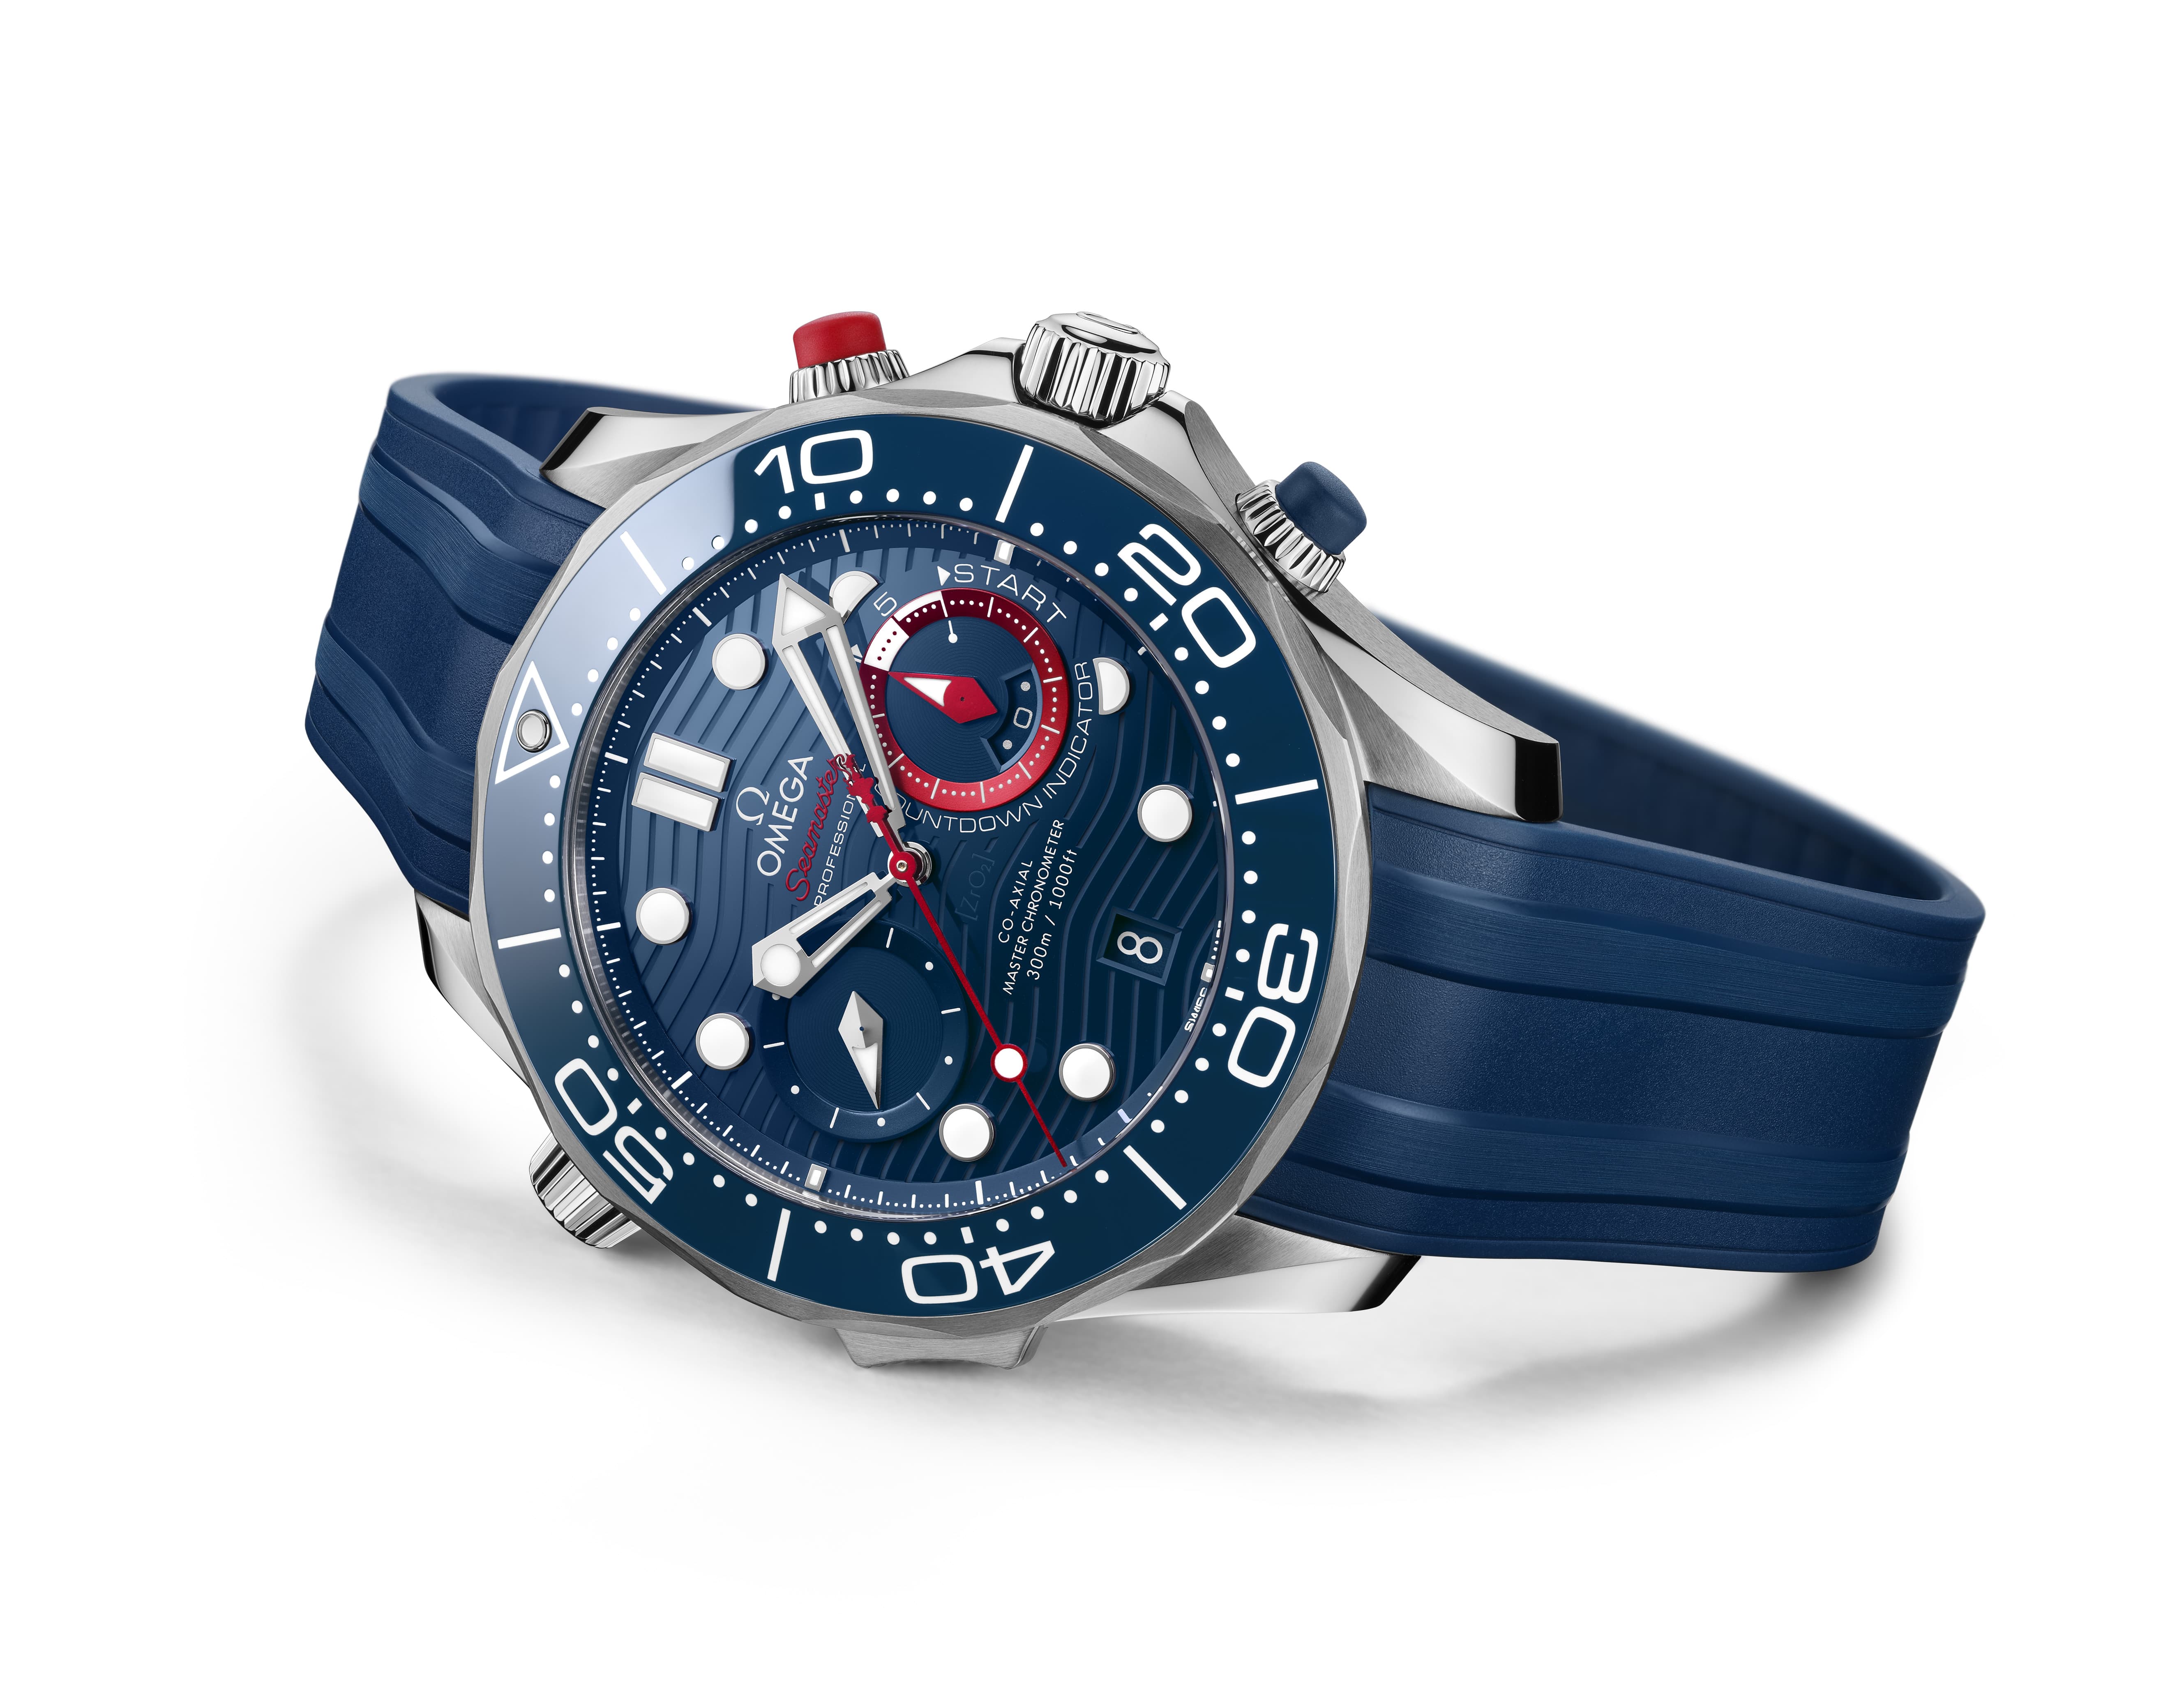 Omega launches a race-ready timepiece